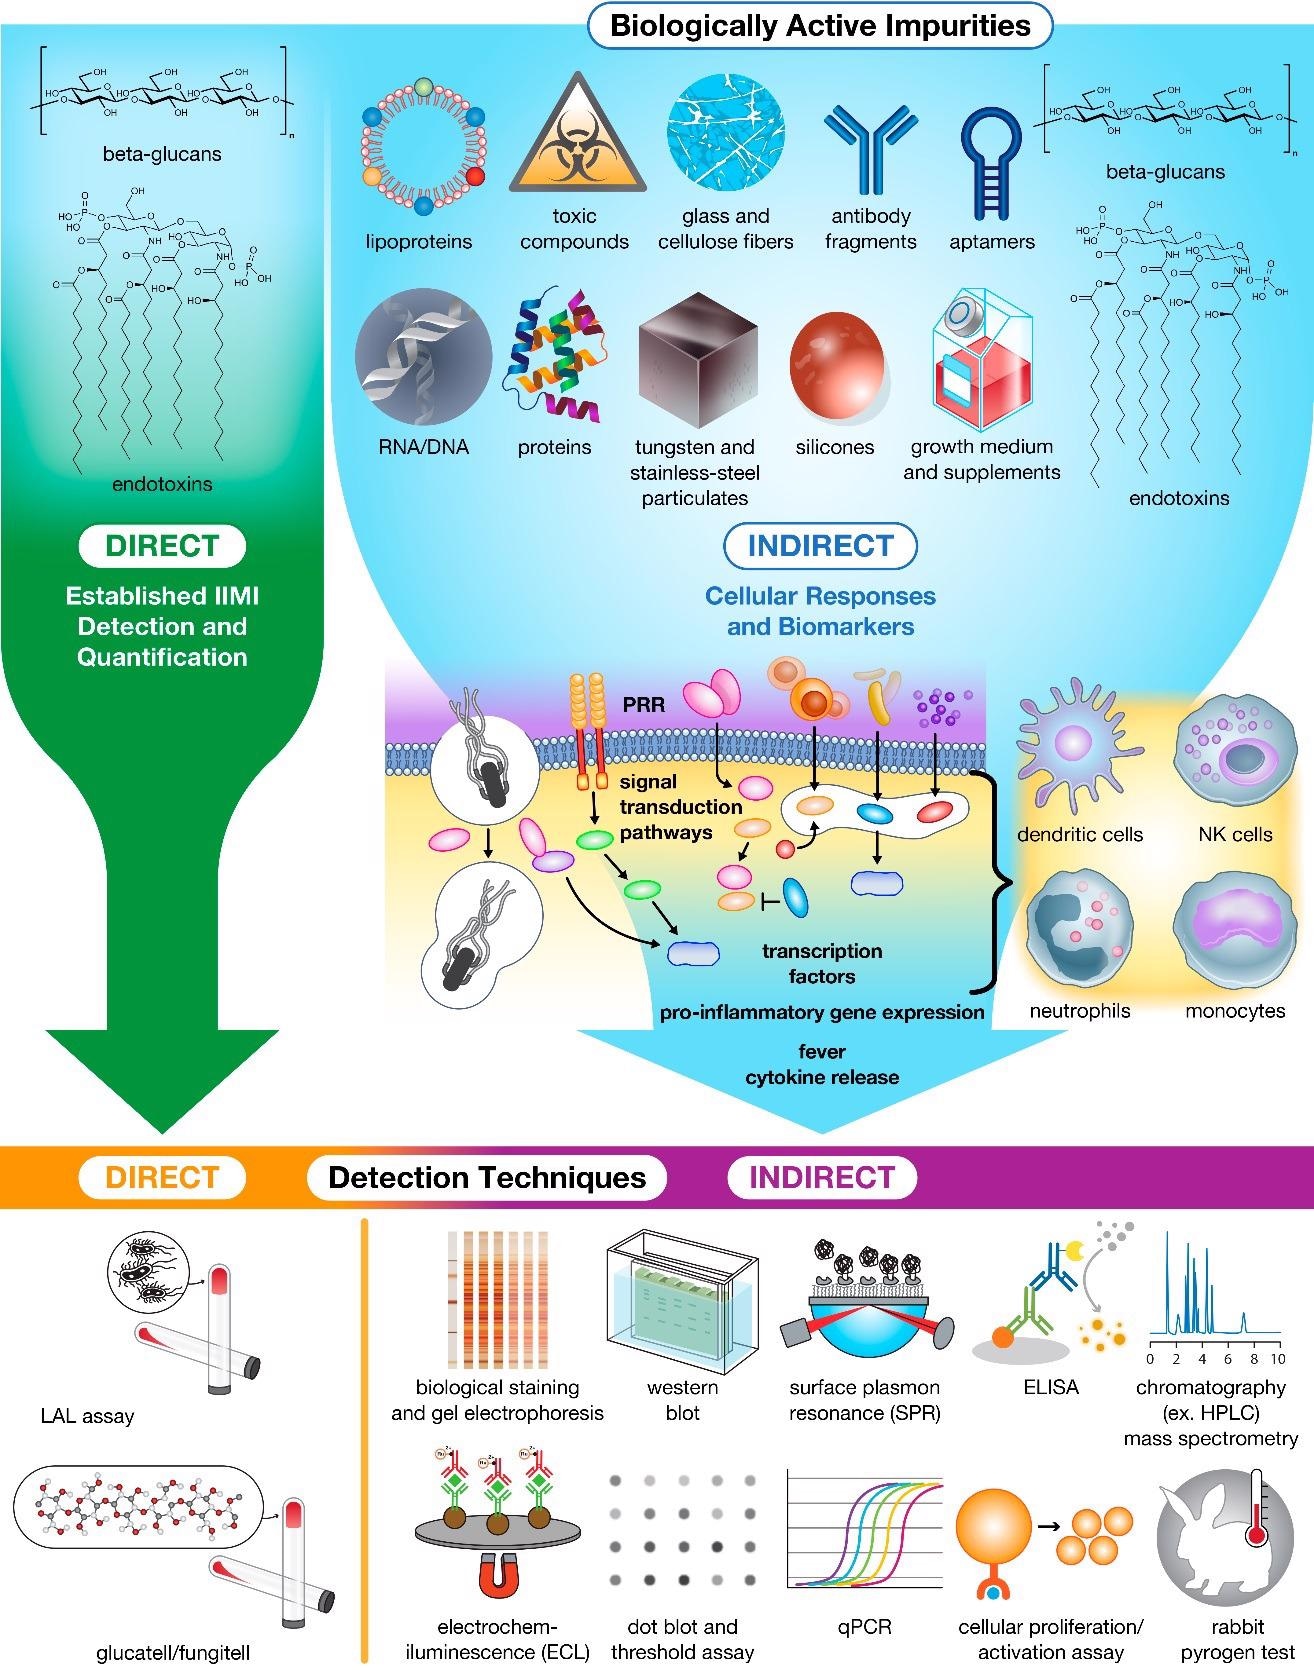 Impurities in drug products trigger innate cellular responses and produce biomarkers for bioassay detection and Quantification. Currently, only ß-glucans and endotoxins can be detected and quantified directly using specialized assays. The remaining population of impurities must instead be detected and quantified indirectly using downstream biomarkers (e.g., proteins, peptides, and nucleic acids) and immune cell activation as hallmarks of contamination.